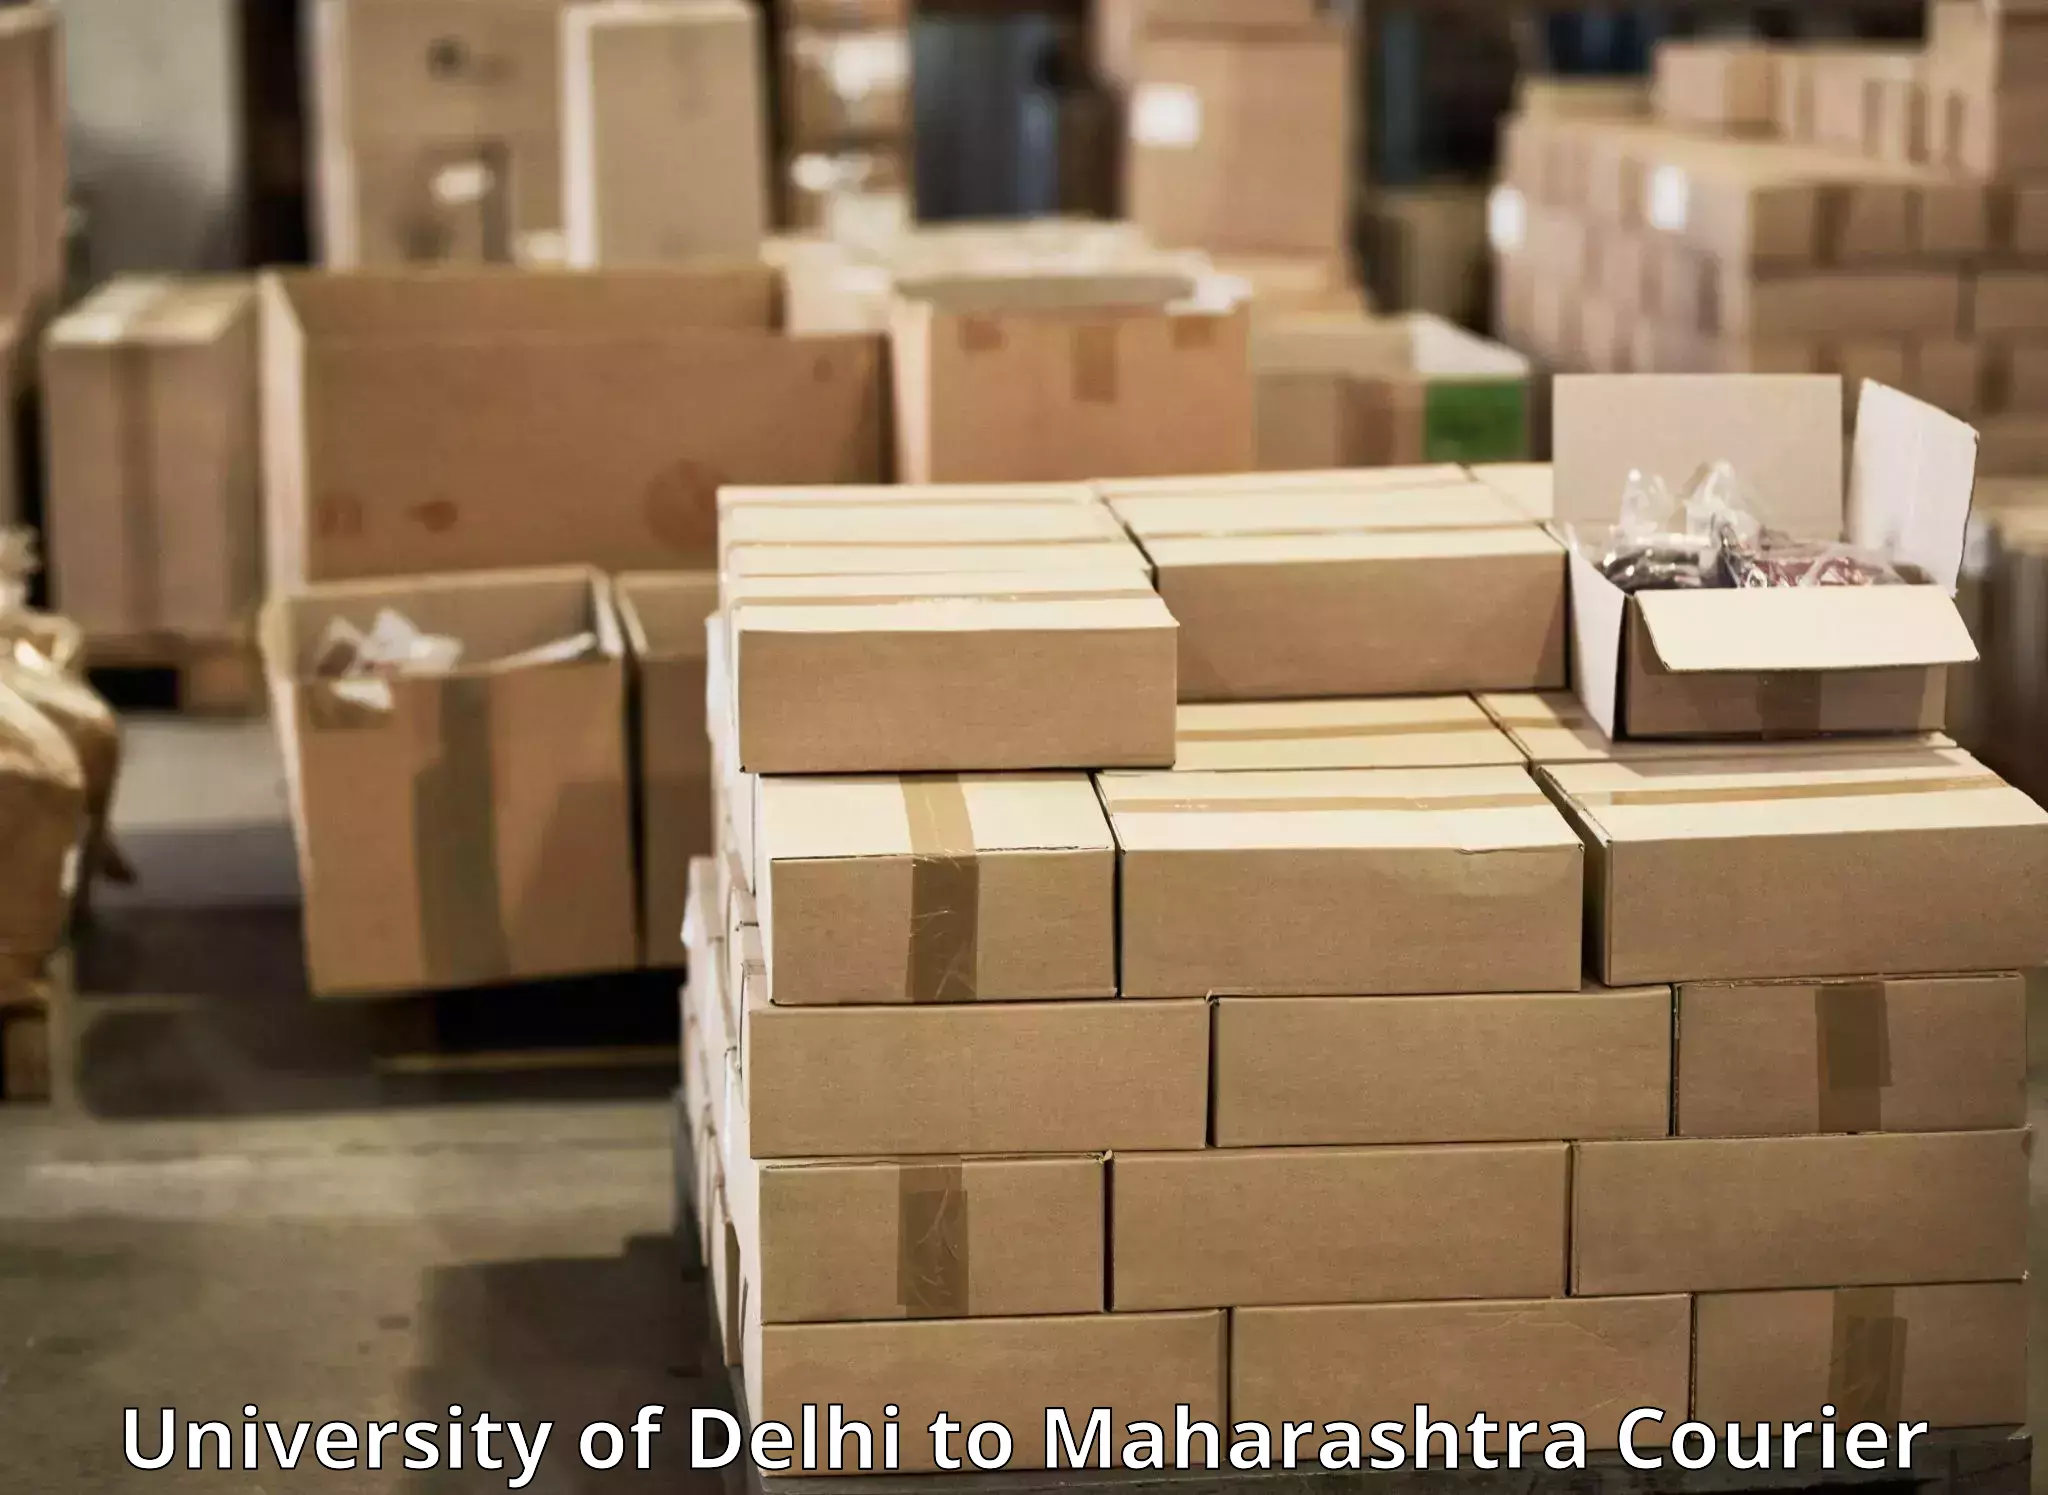 Nationwide shipping coverage in University of Delhi to Panvel